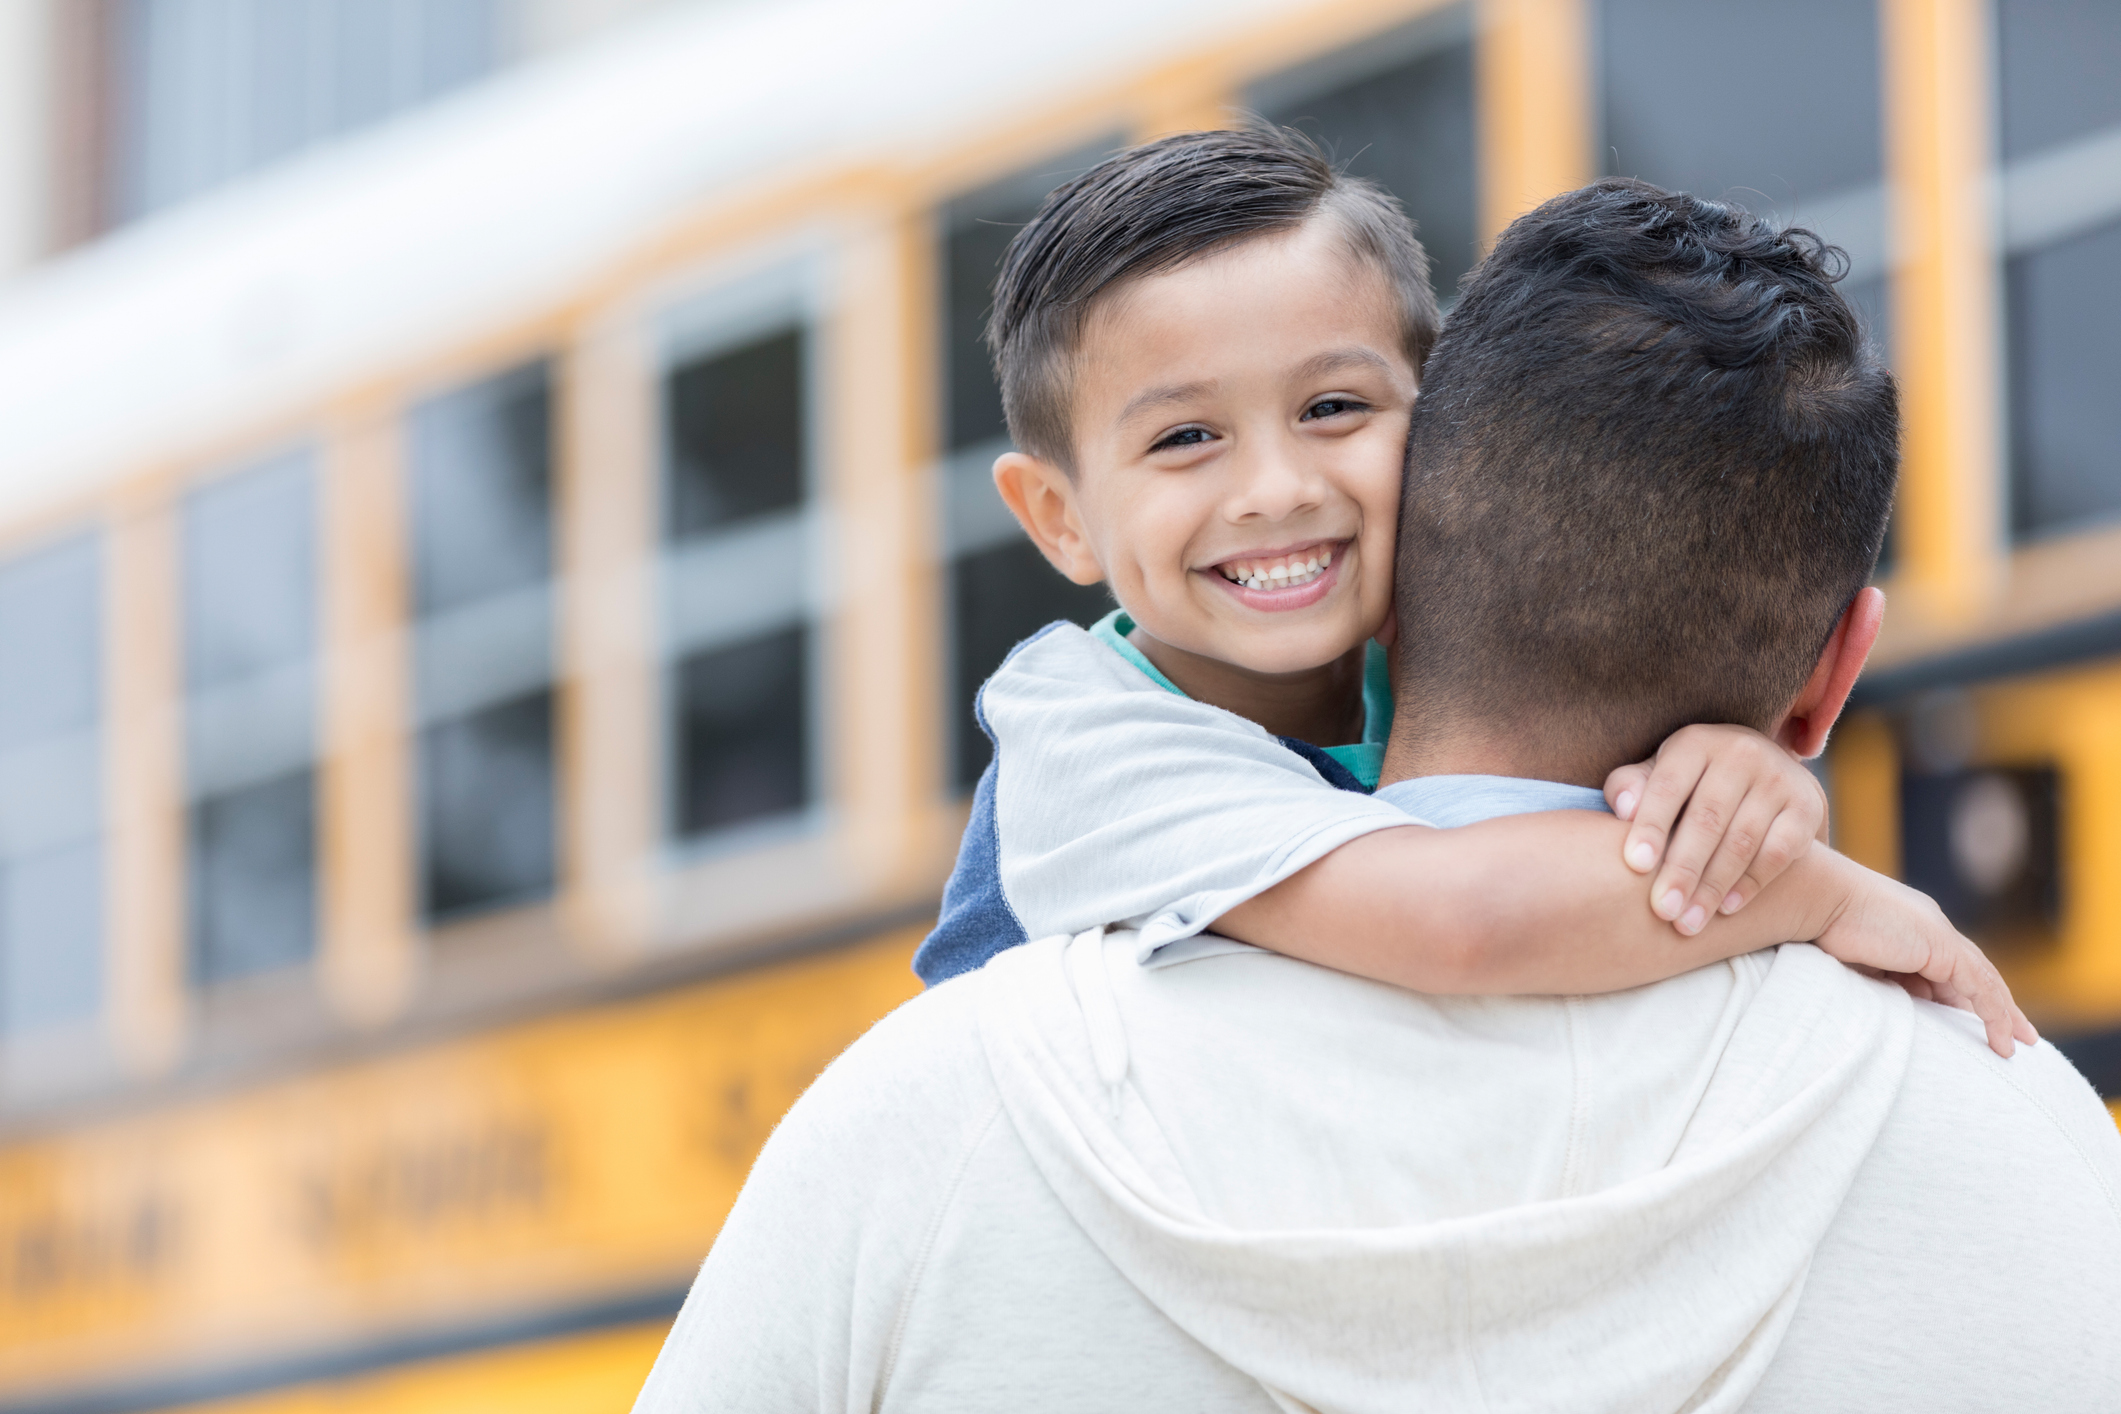 The Influence of Parental Activism: Corey DeAngelis on Empowering Parents Against School Boards